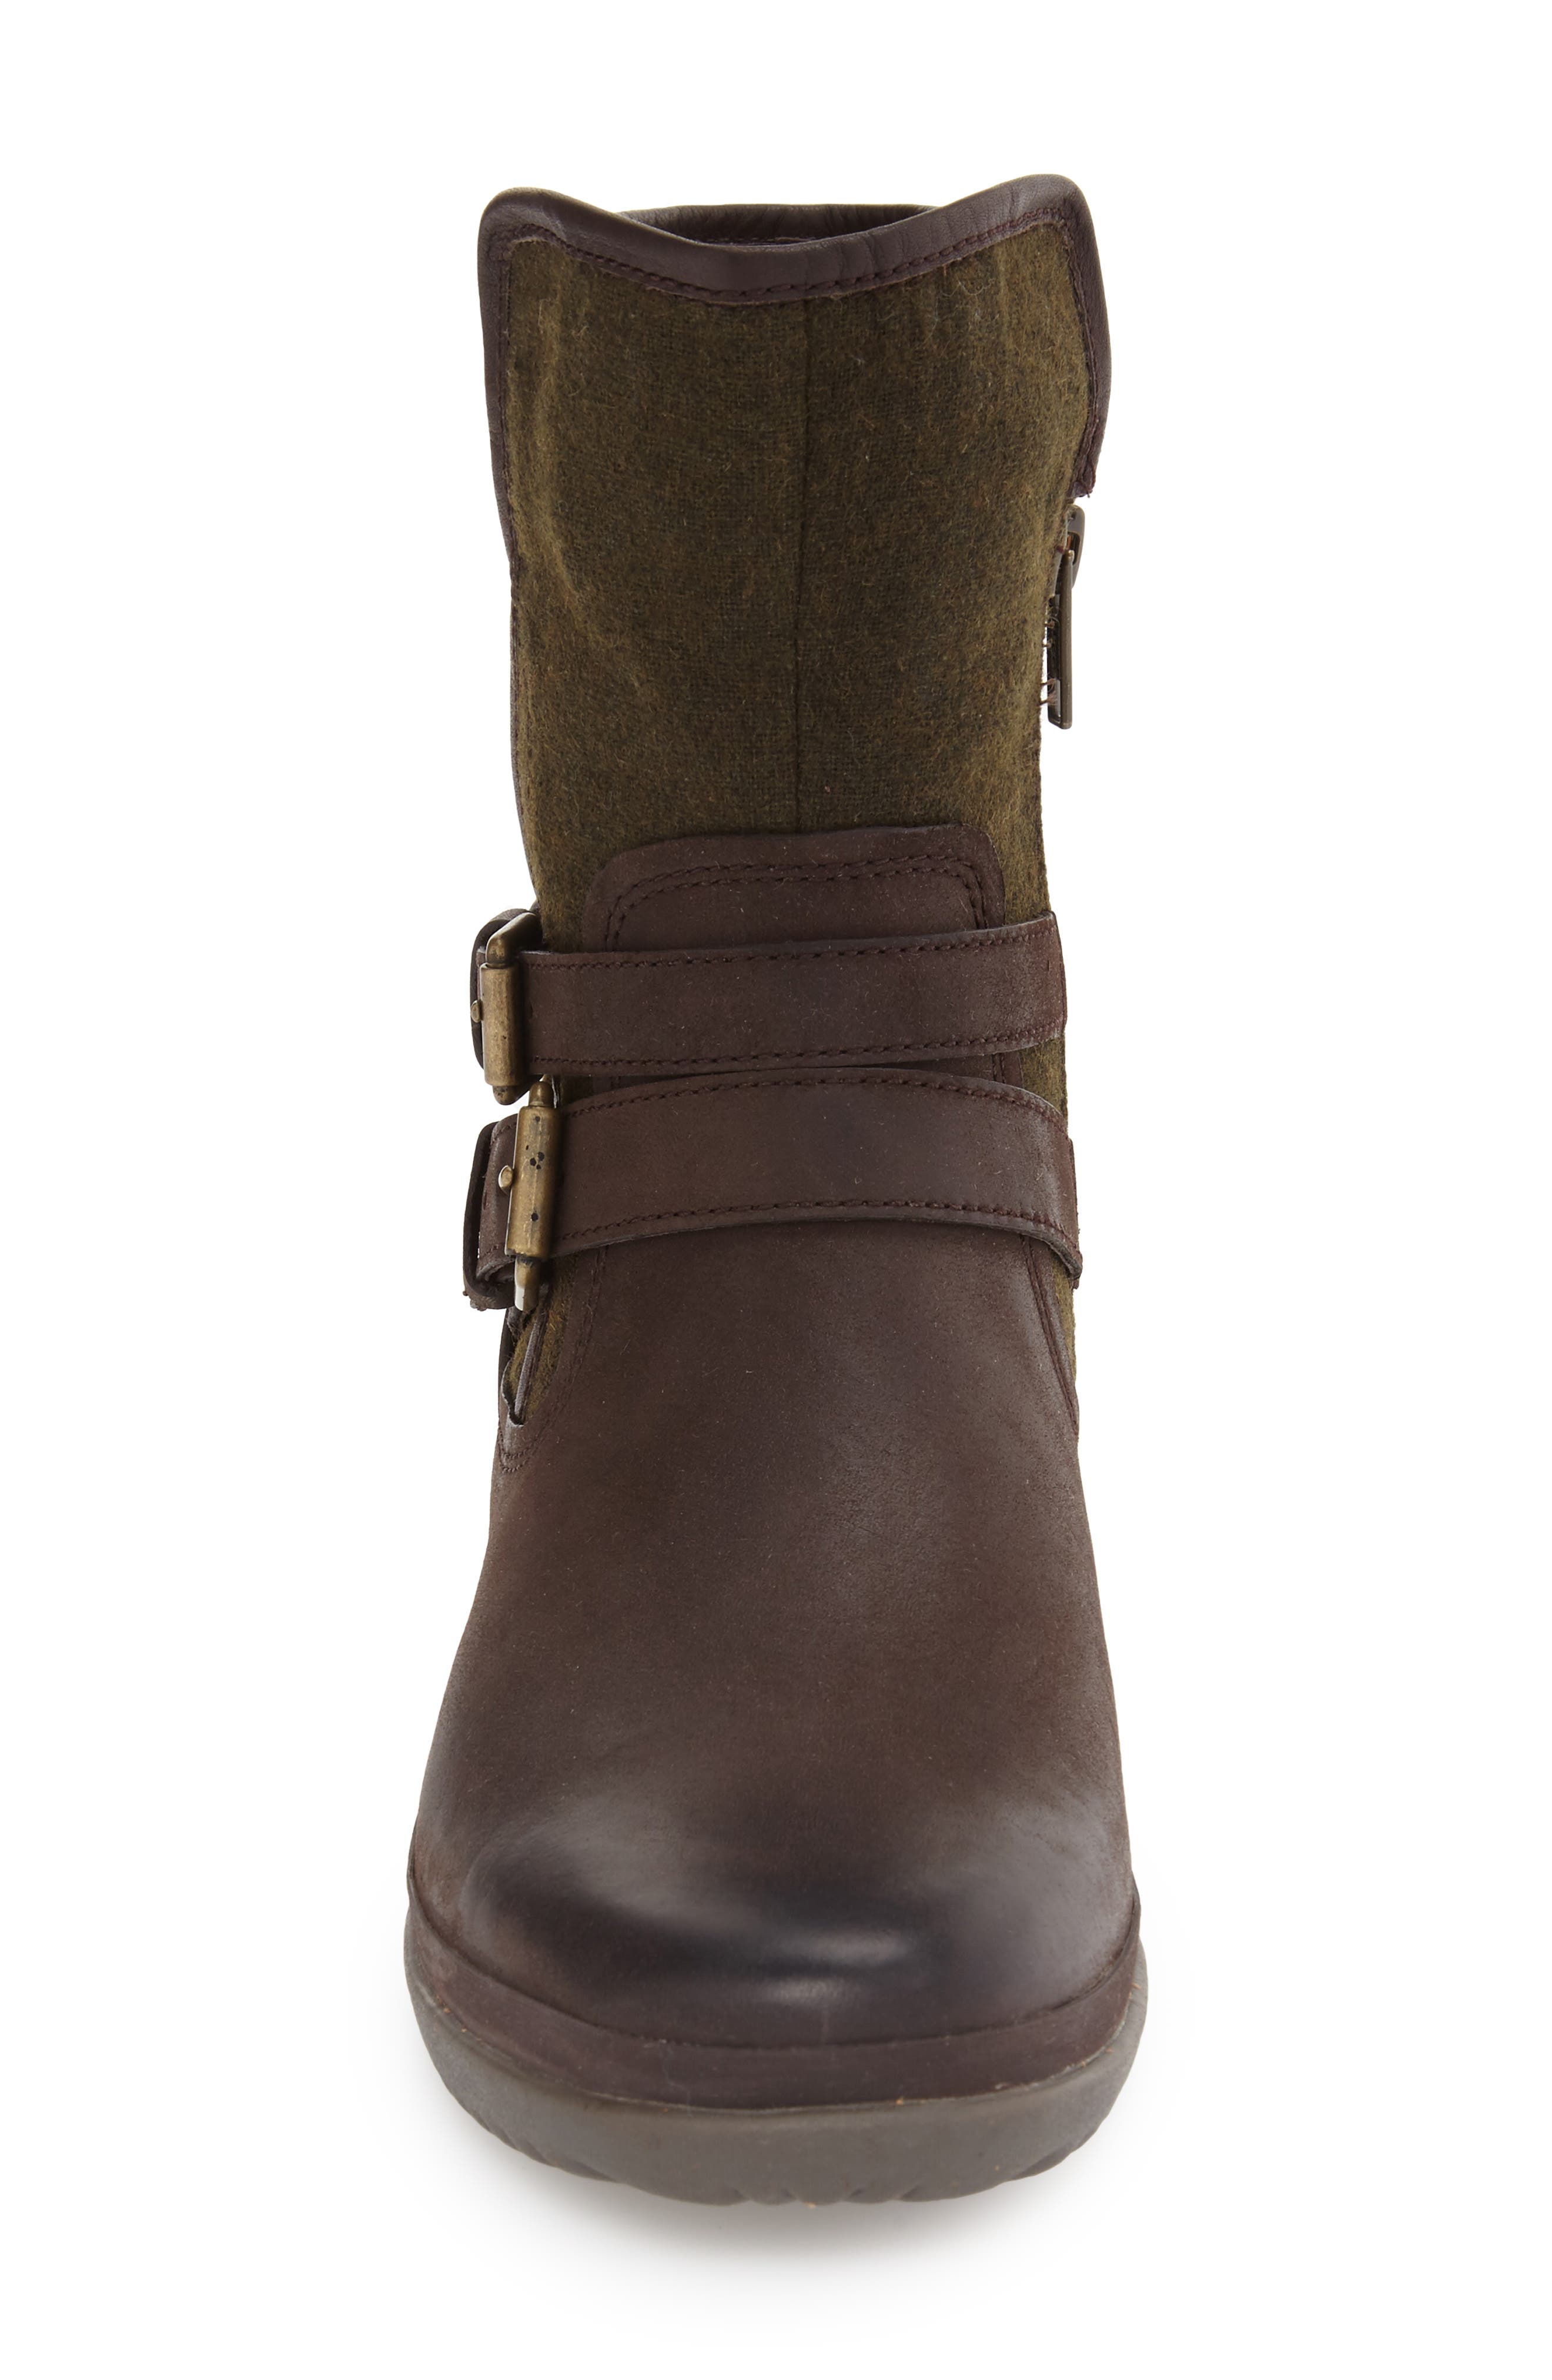 simmens waterproof leather boot